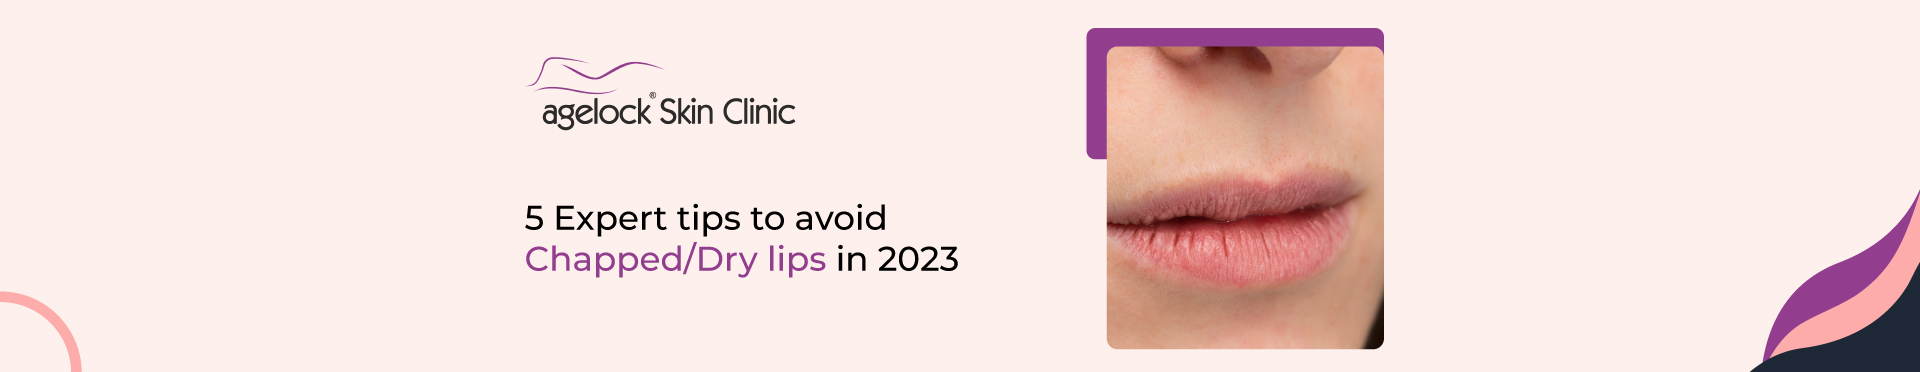 <strong>5 Expert tips to avoid chapped/dry lips in 2023</strong>